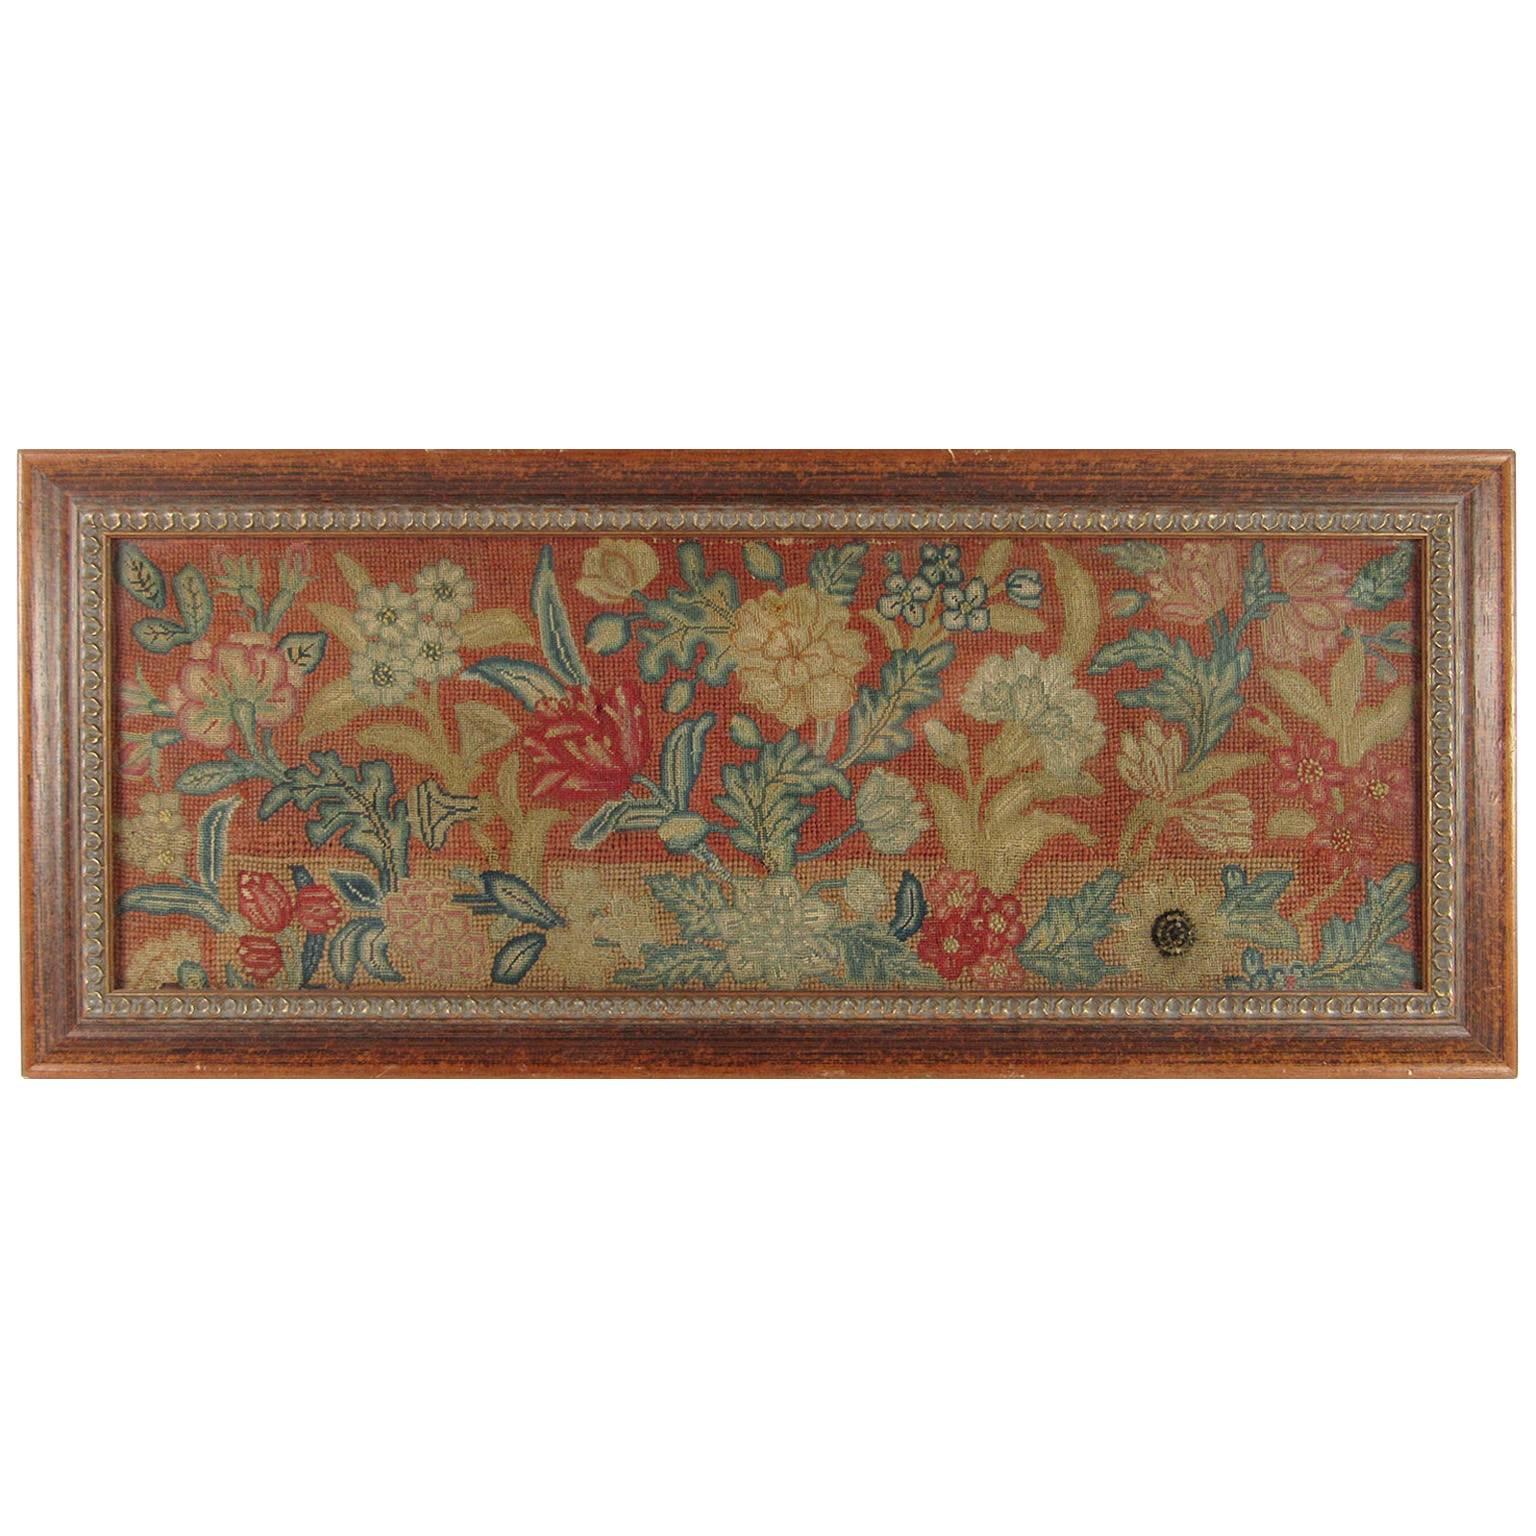 Antique, 18th Century or Earlier English Needlework Framed Floral Panel For Sale